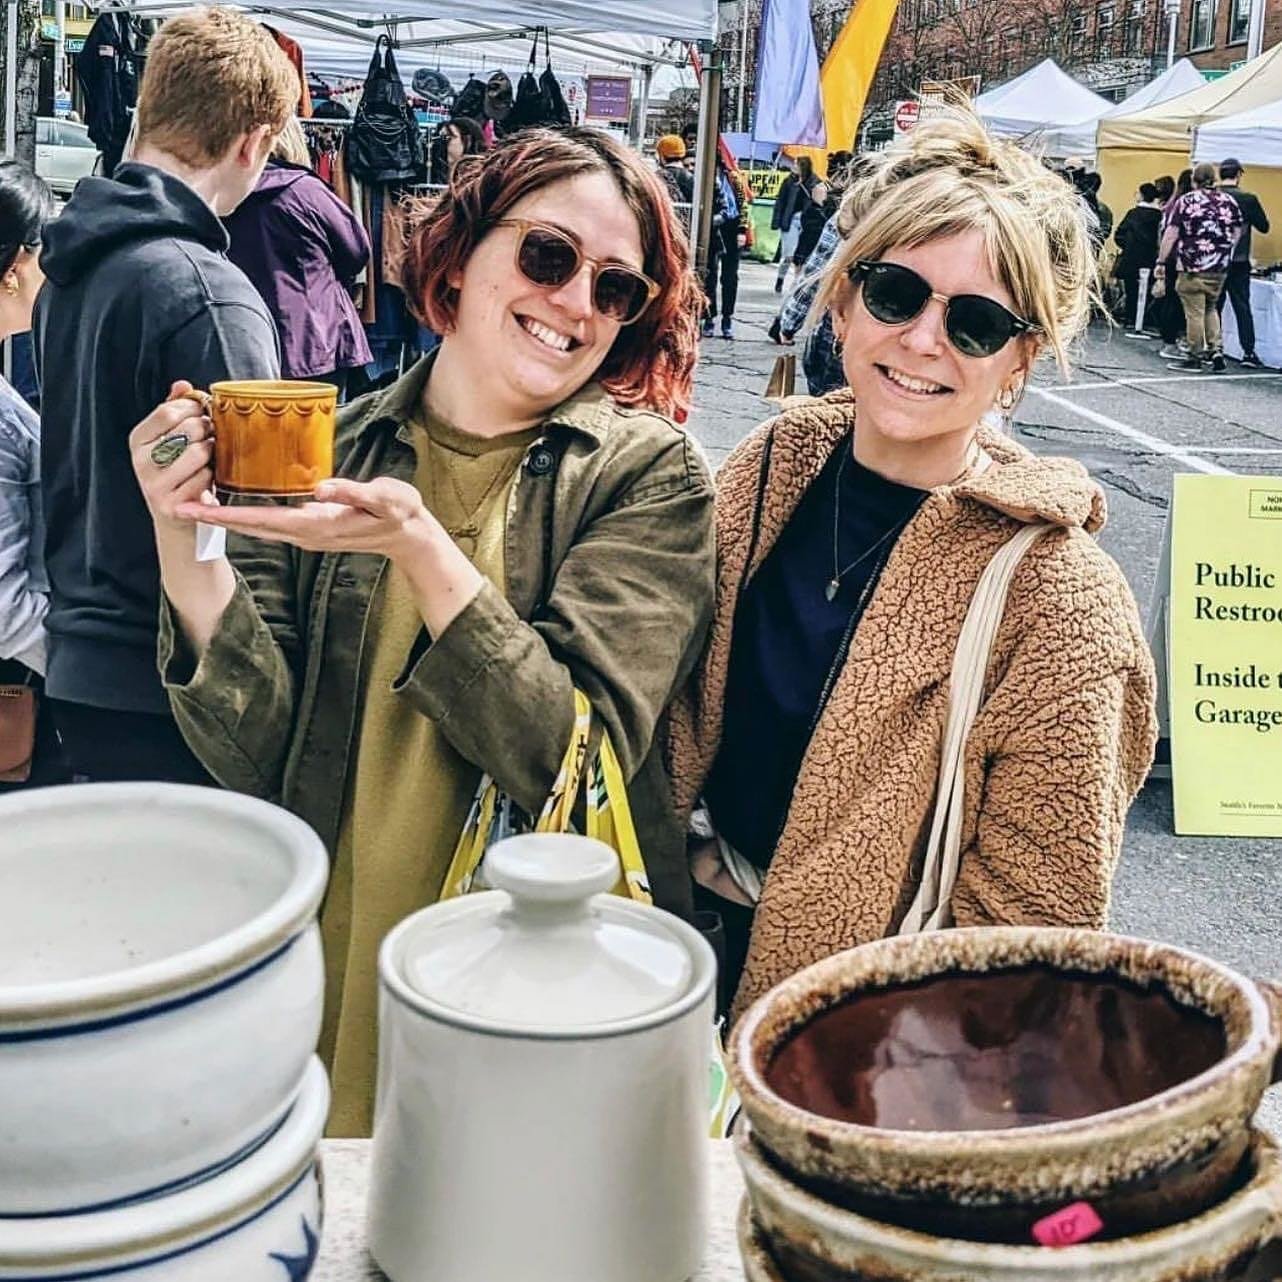 Seattle&rsquo;s favorite treasure hunt happens every Sunday with 200+ booths curbside! Discover local artists, shop vintage racks and eat at our outdoor food district with no reservations ever! See you today from 10-4pm #fremontsundaymarket #fremomts